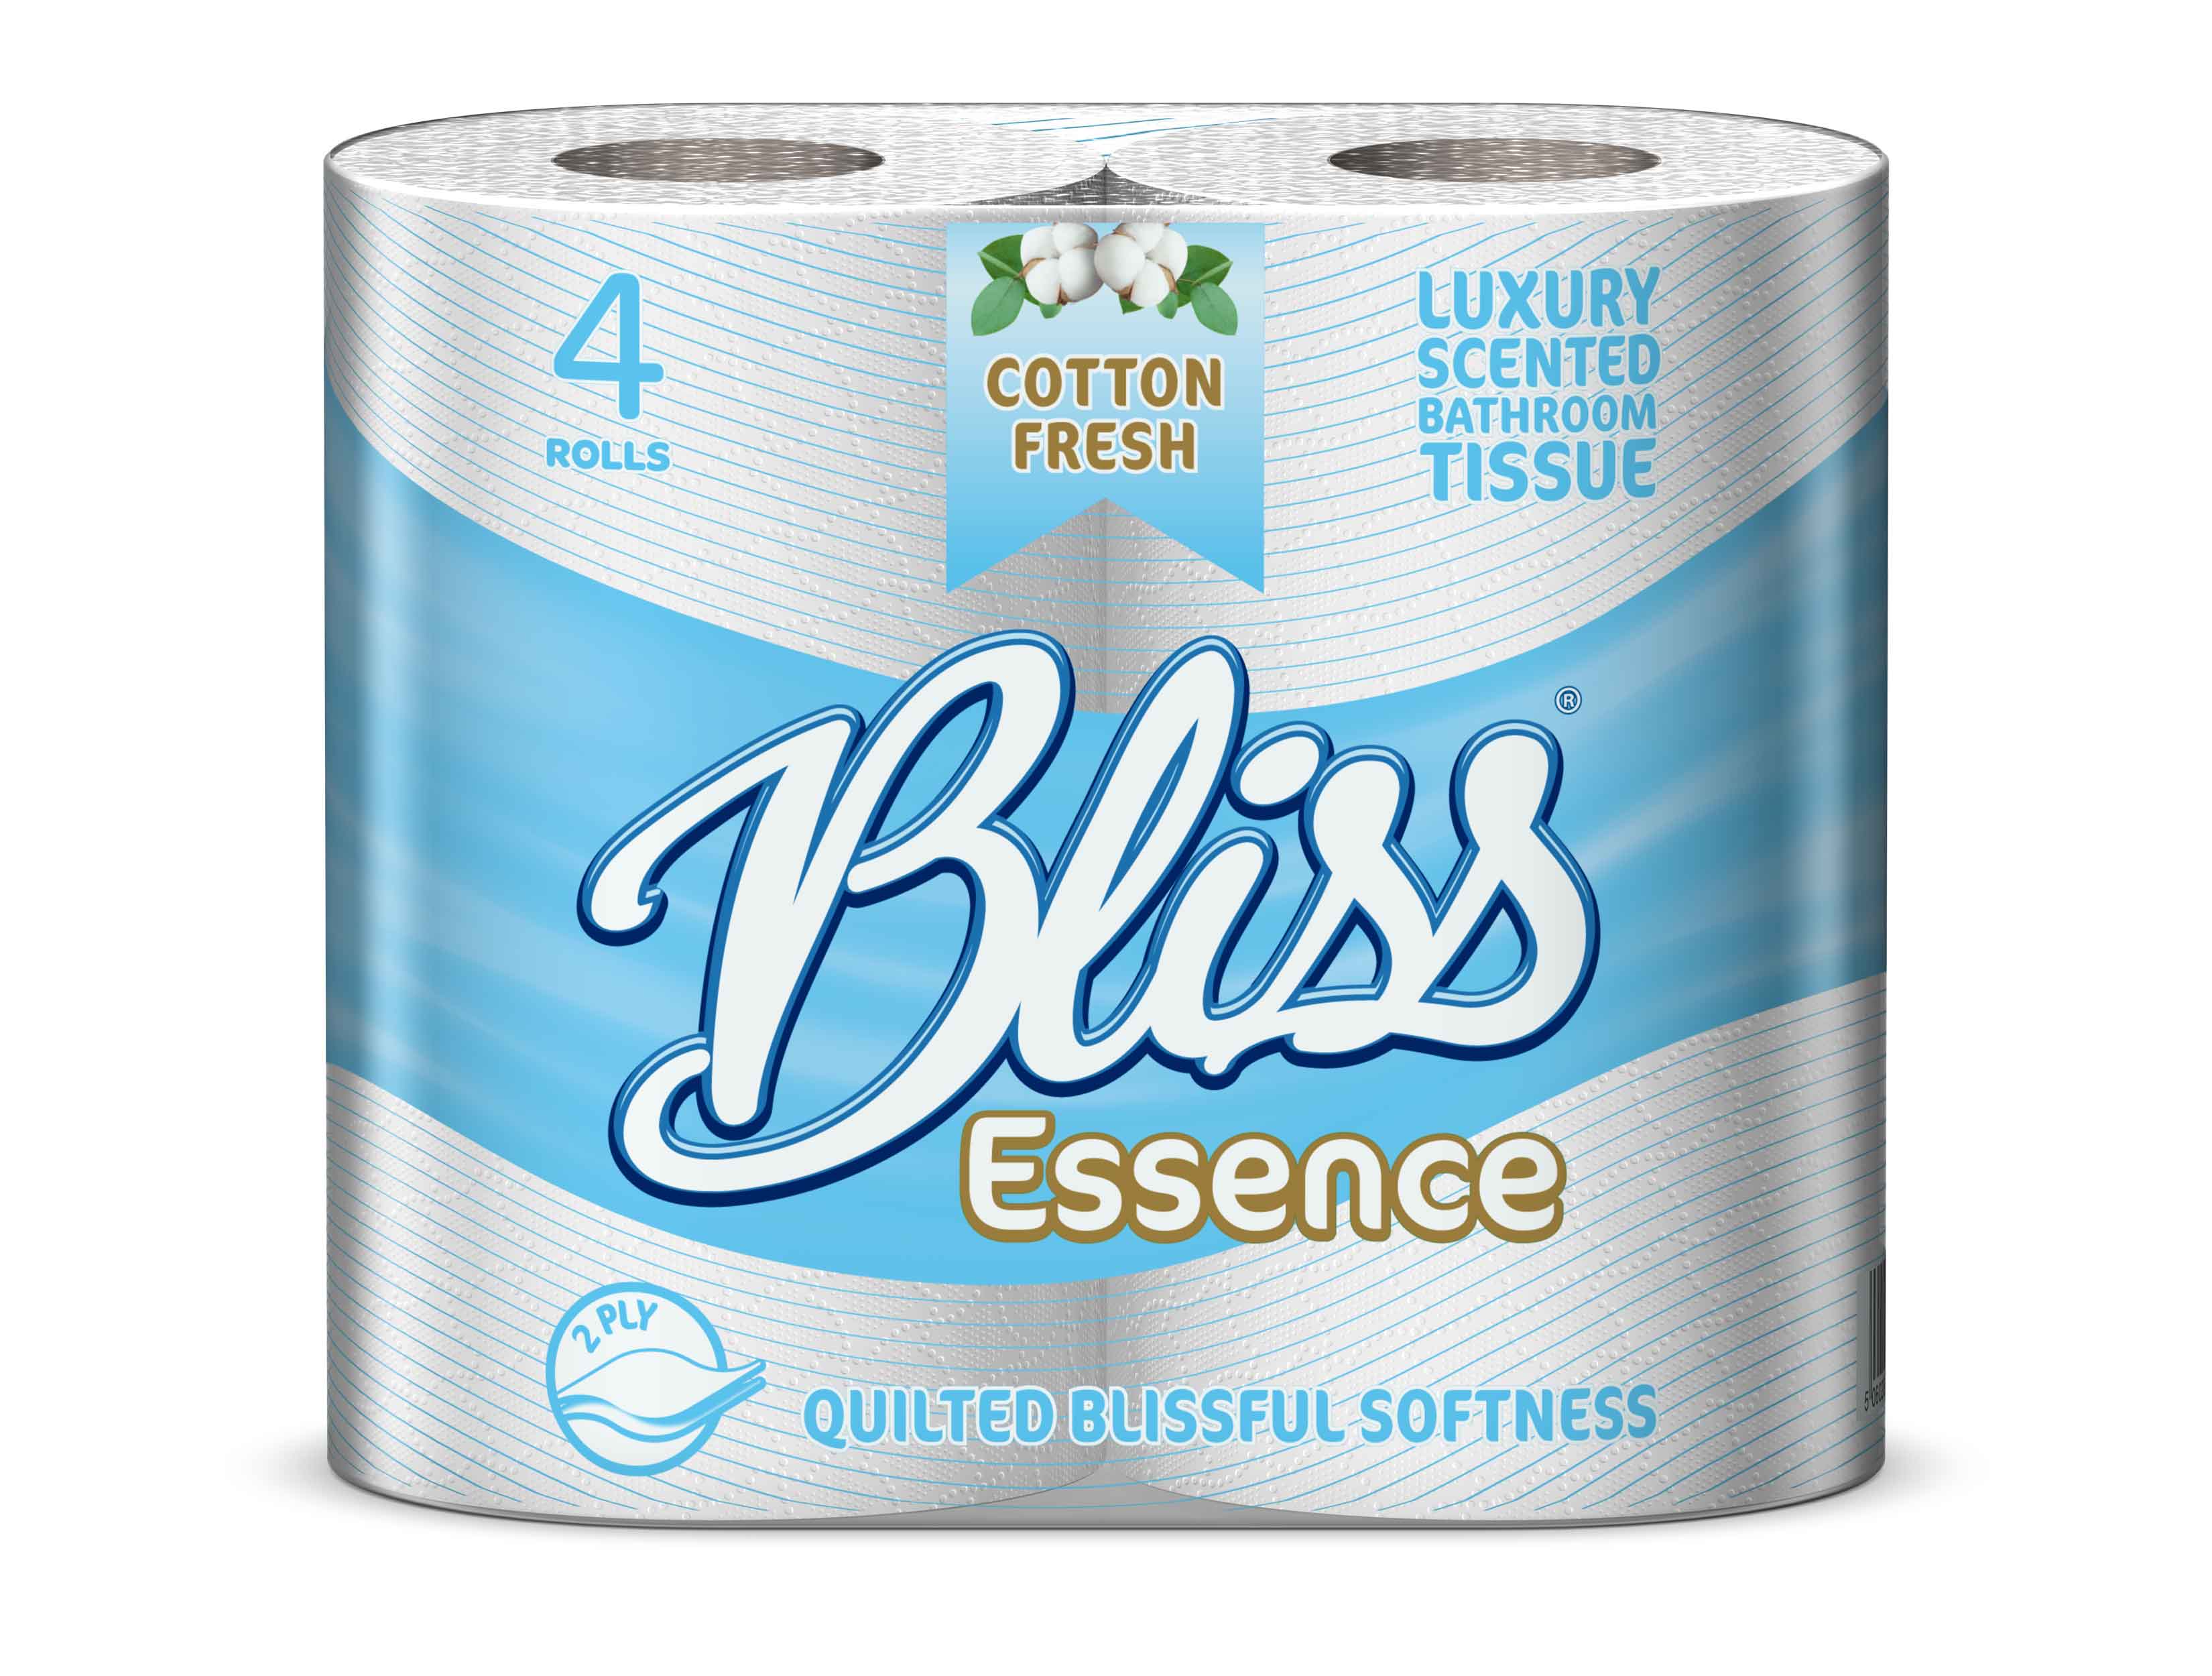 Luxury Scented Bliss Bath tissue paper 40 Rolls 2Ply Cotton Fresh